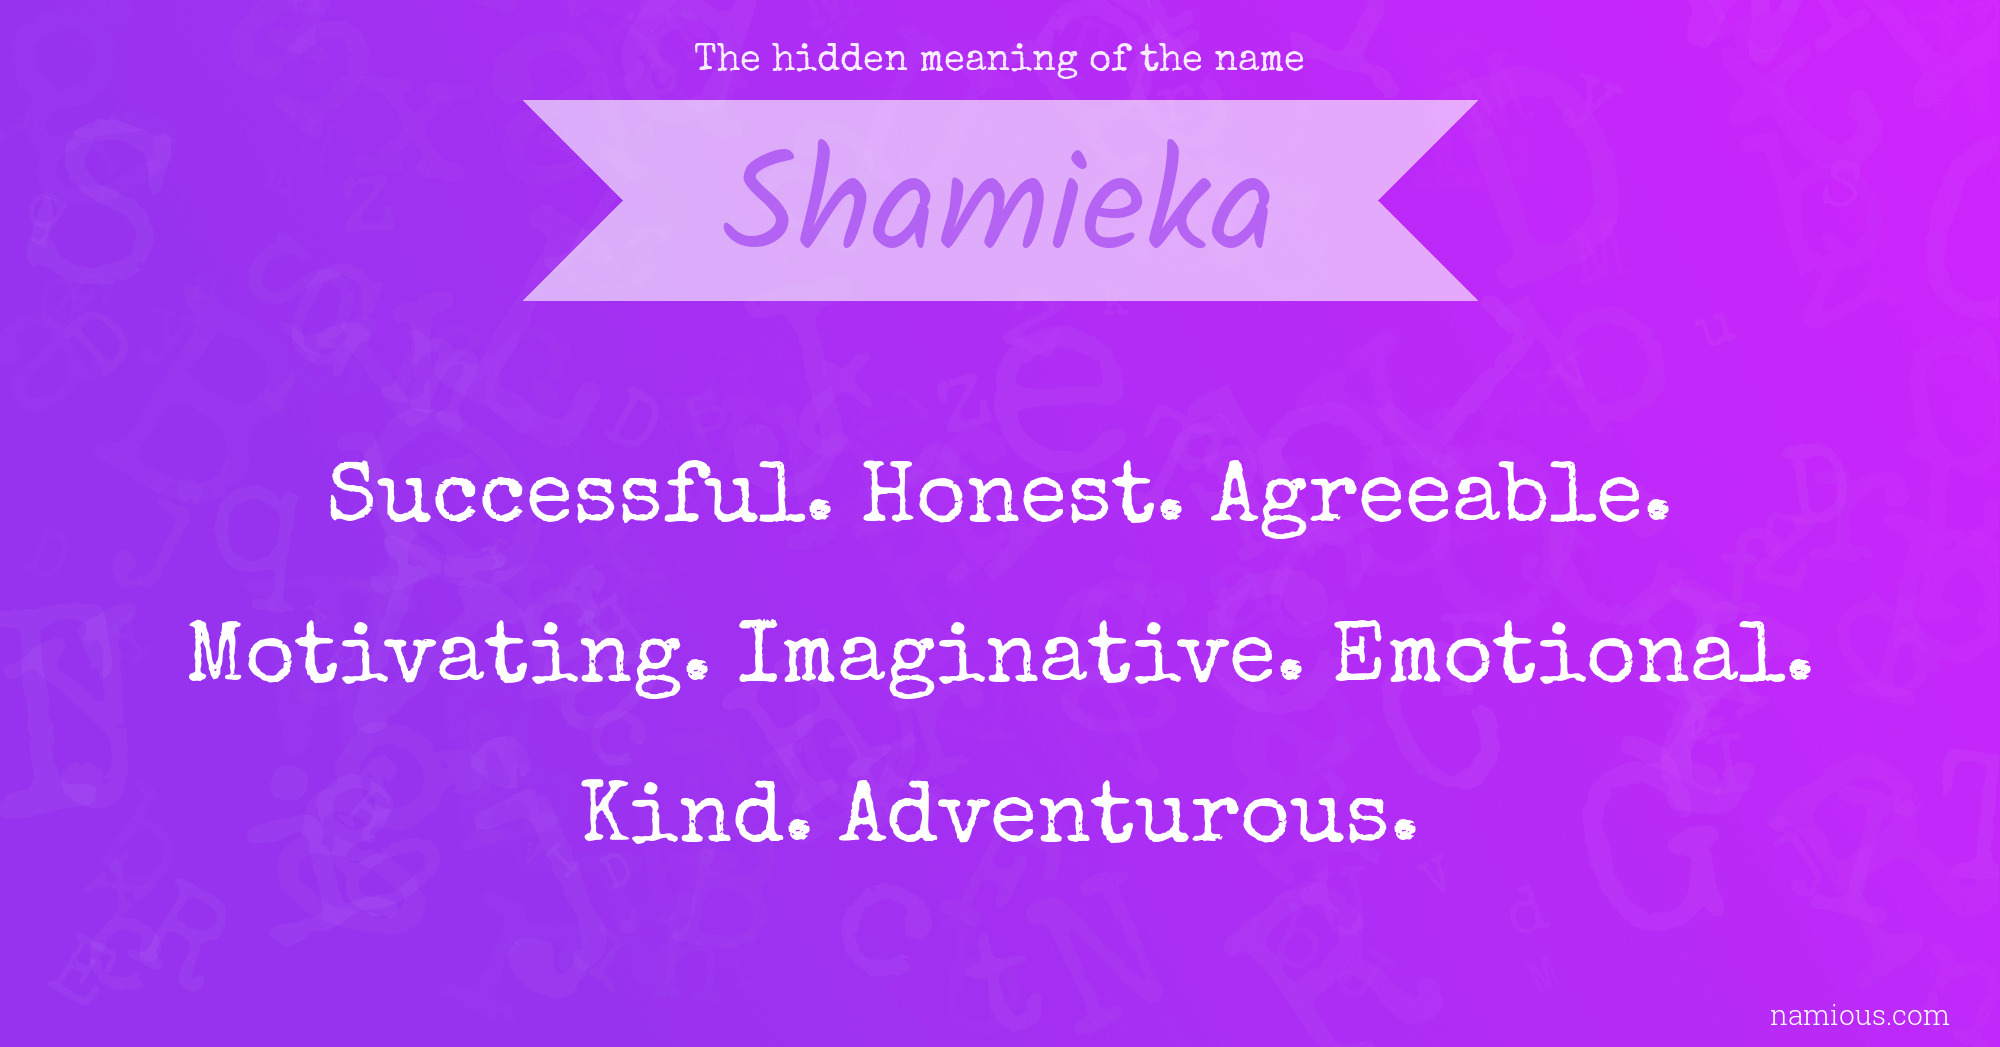 The hidden meaning of the name Shamieka